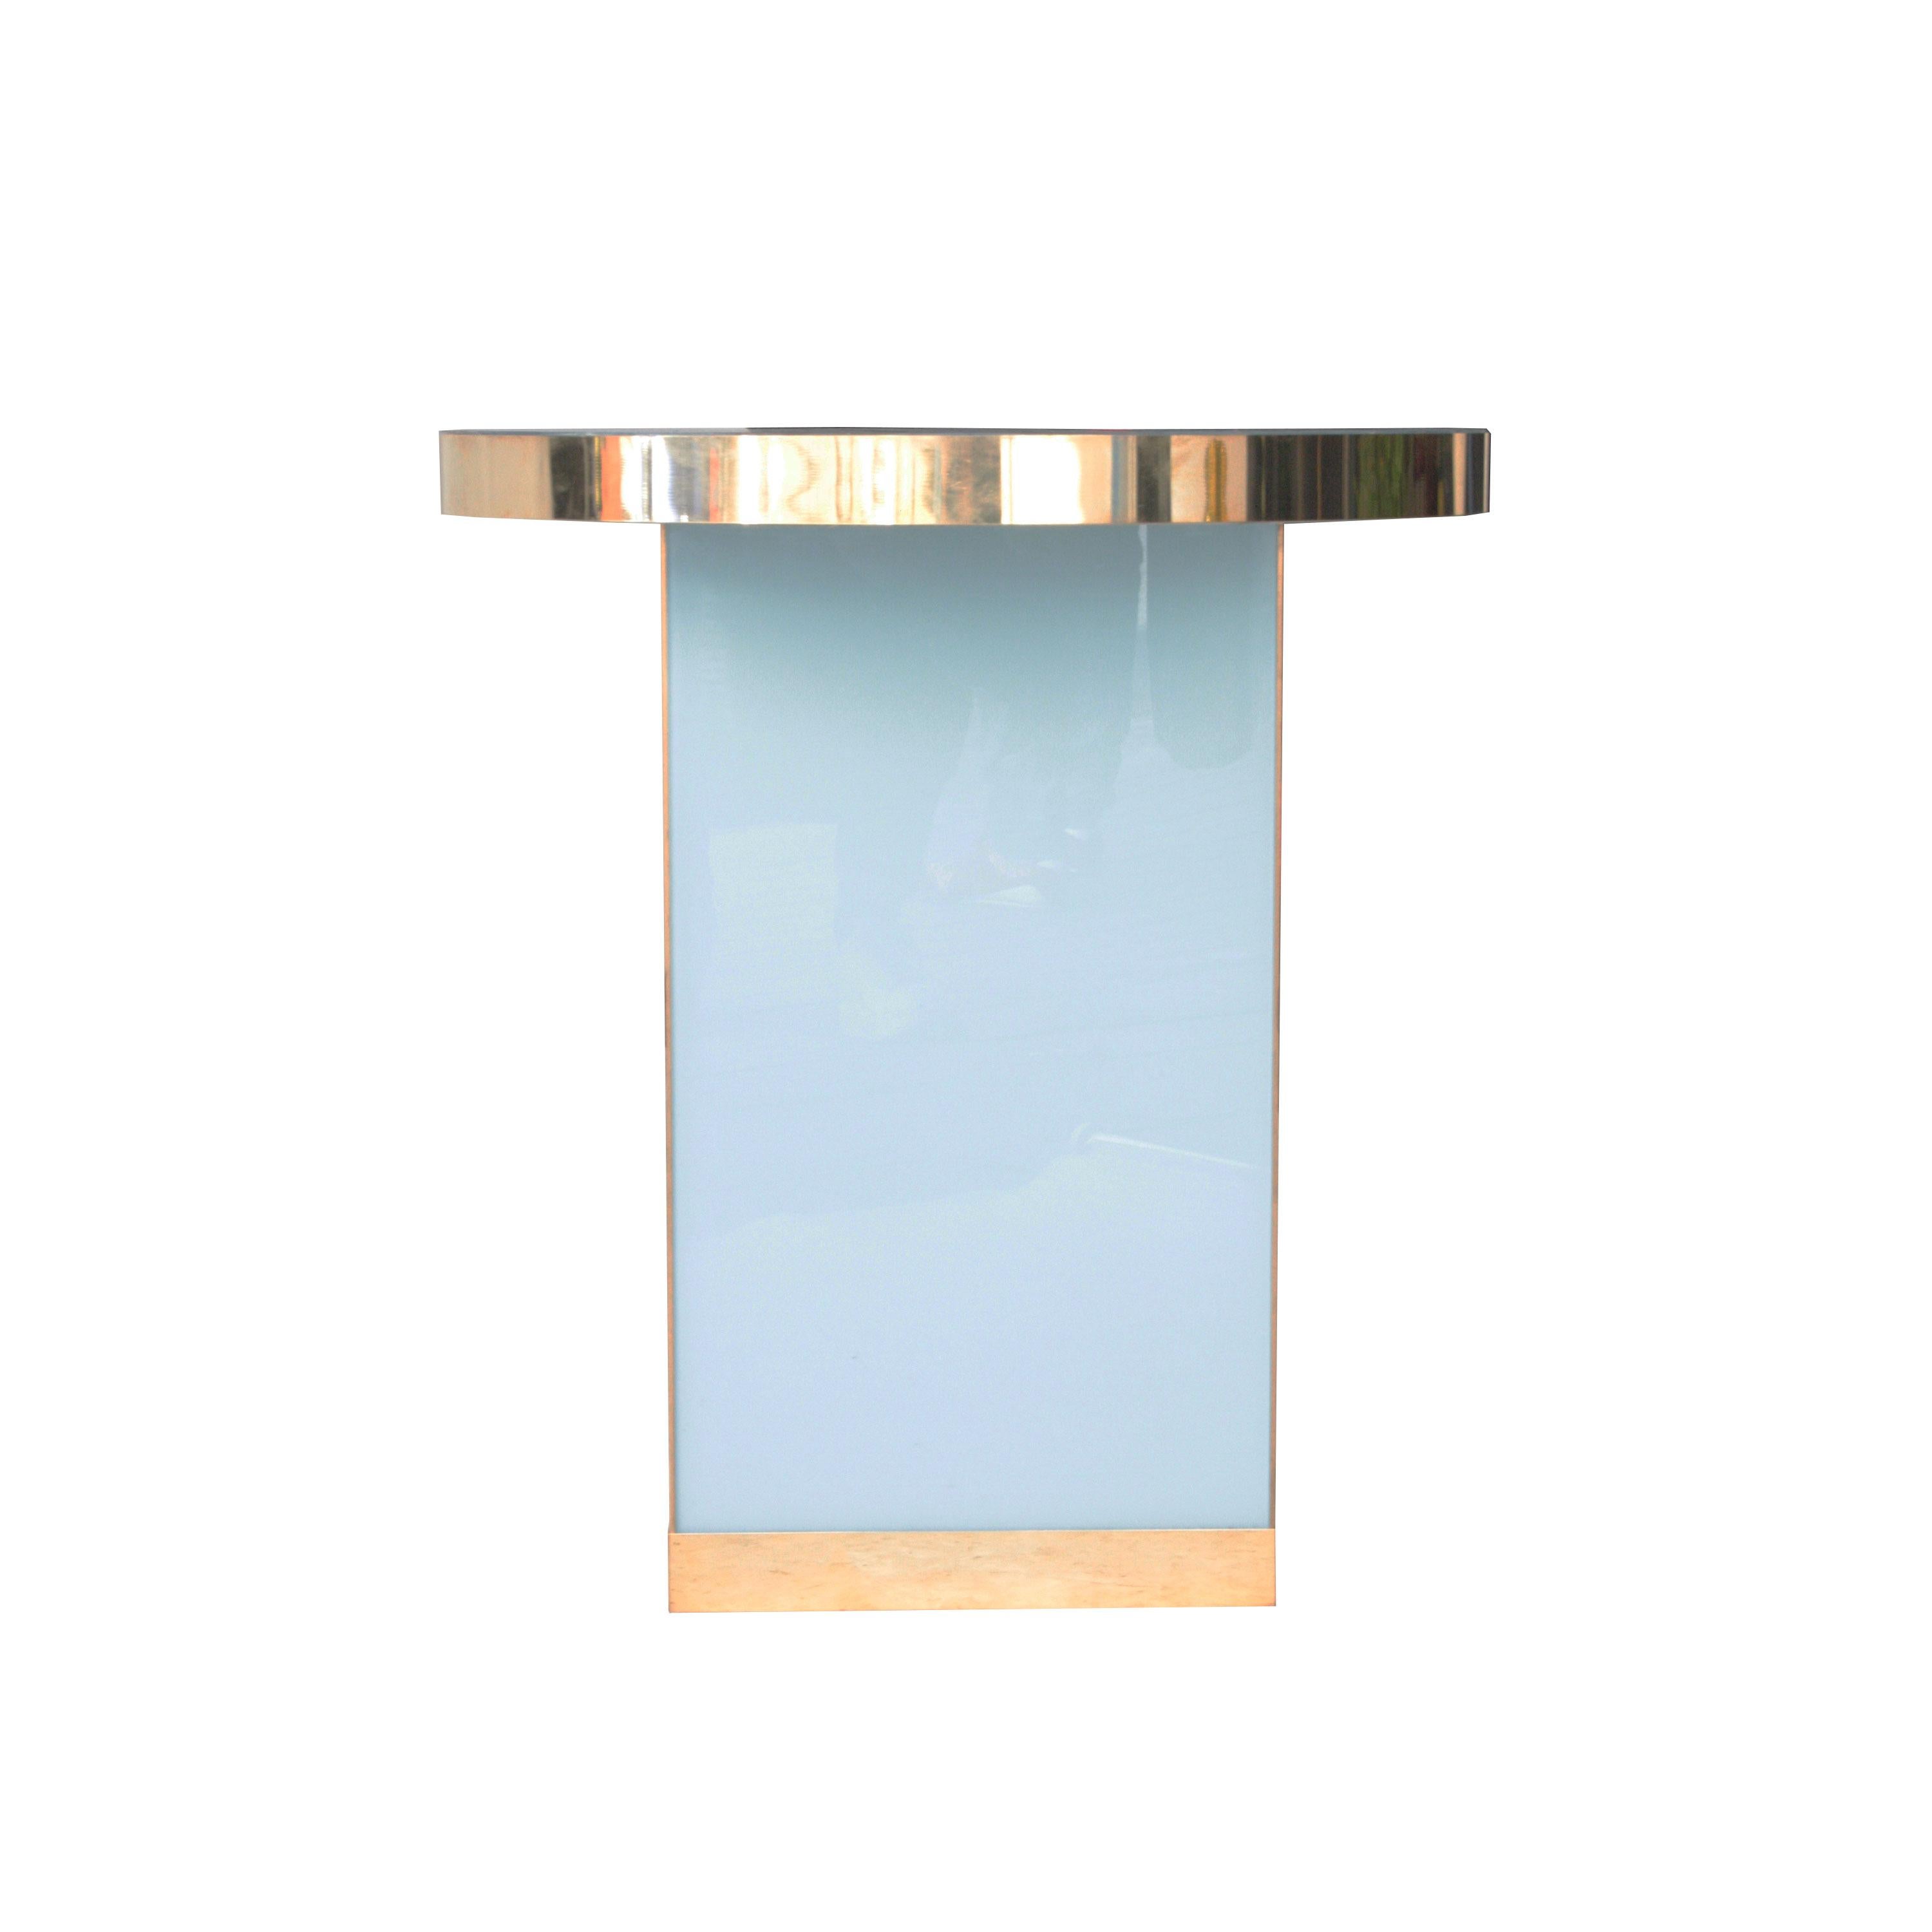 Spanish side table with base in the form of rectangular prism and circular envelope with brass finishes and crystals in lacobel handcrafted in gold and blue tones.